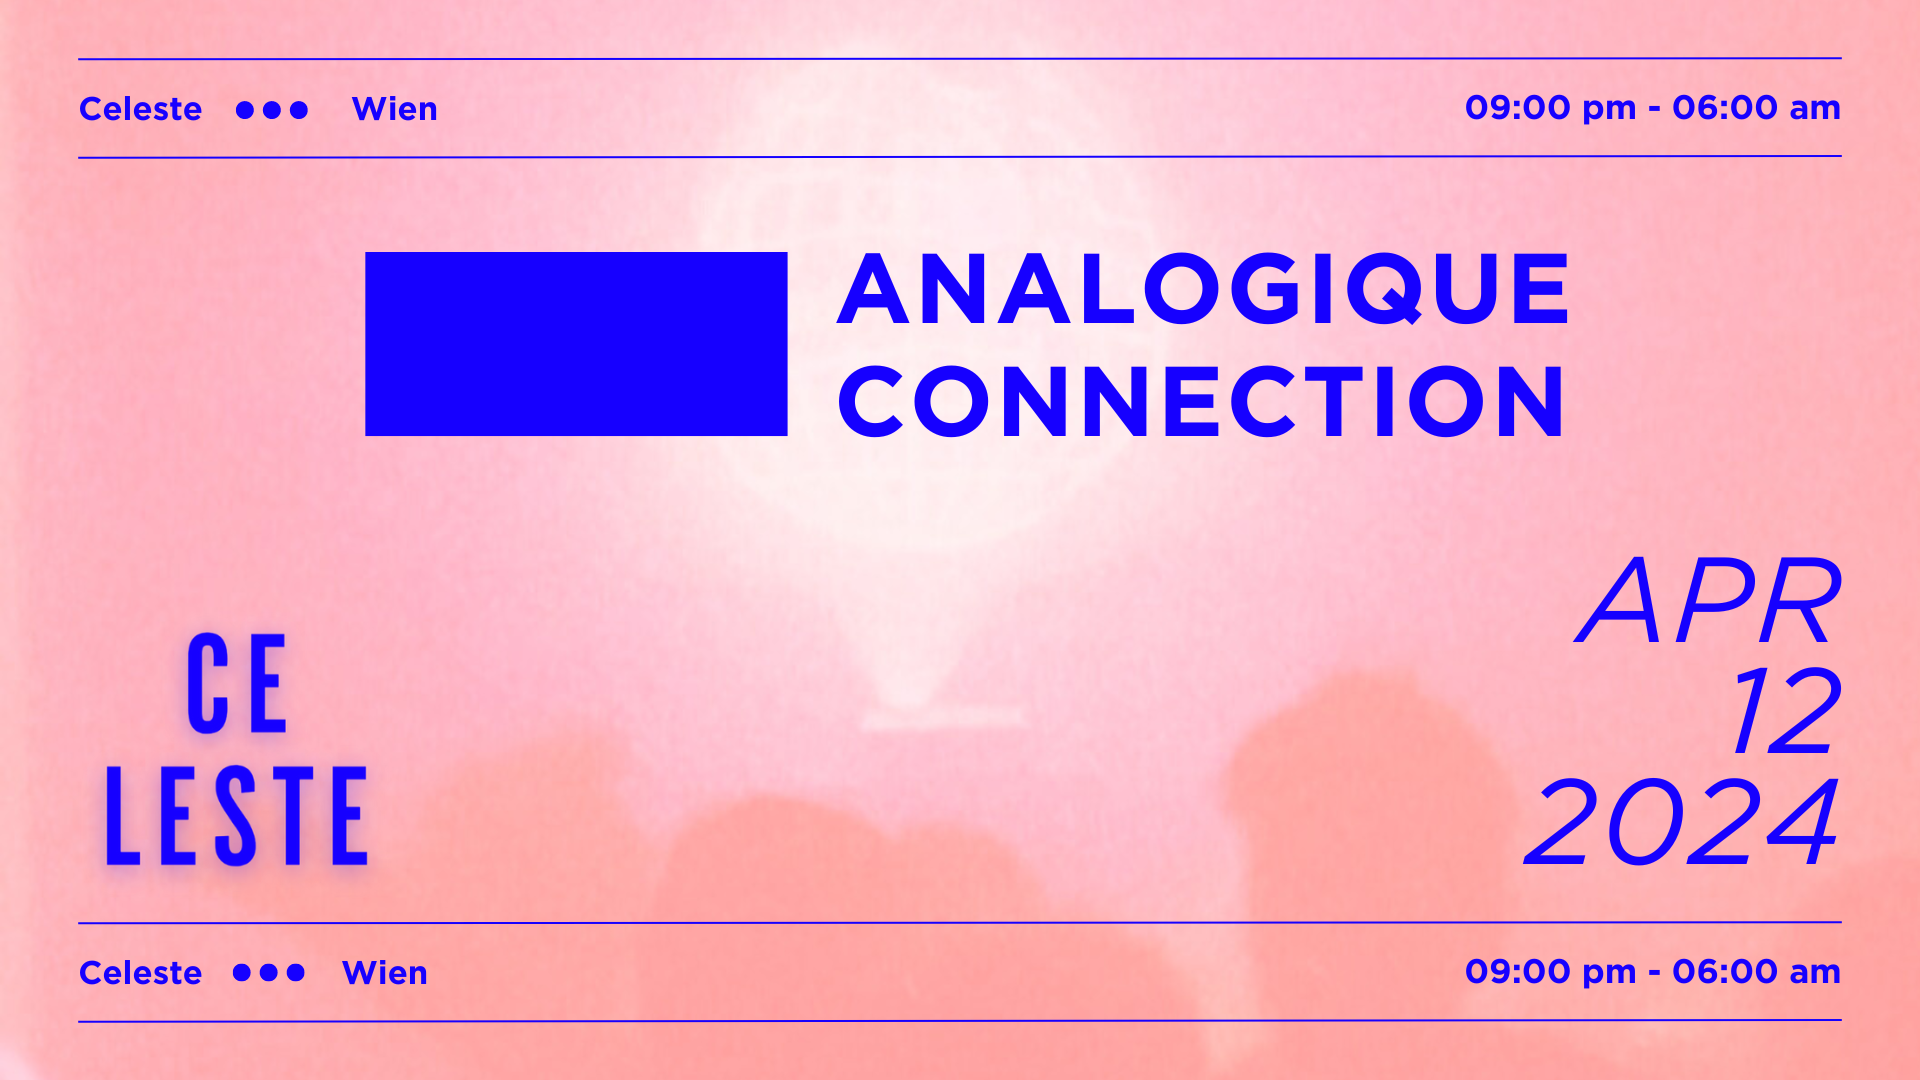 Analogique Connection - フライヤー表